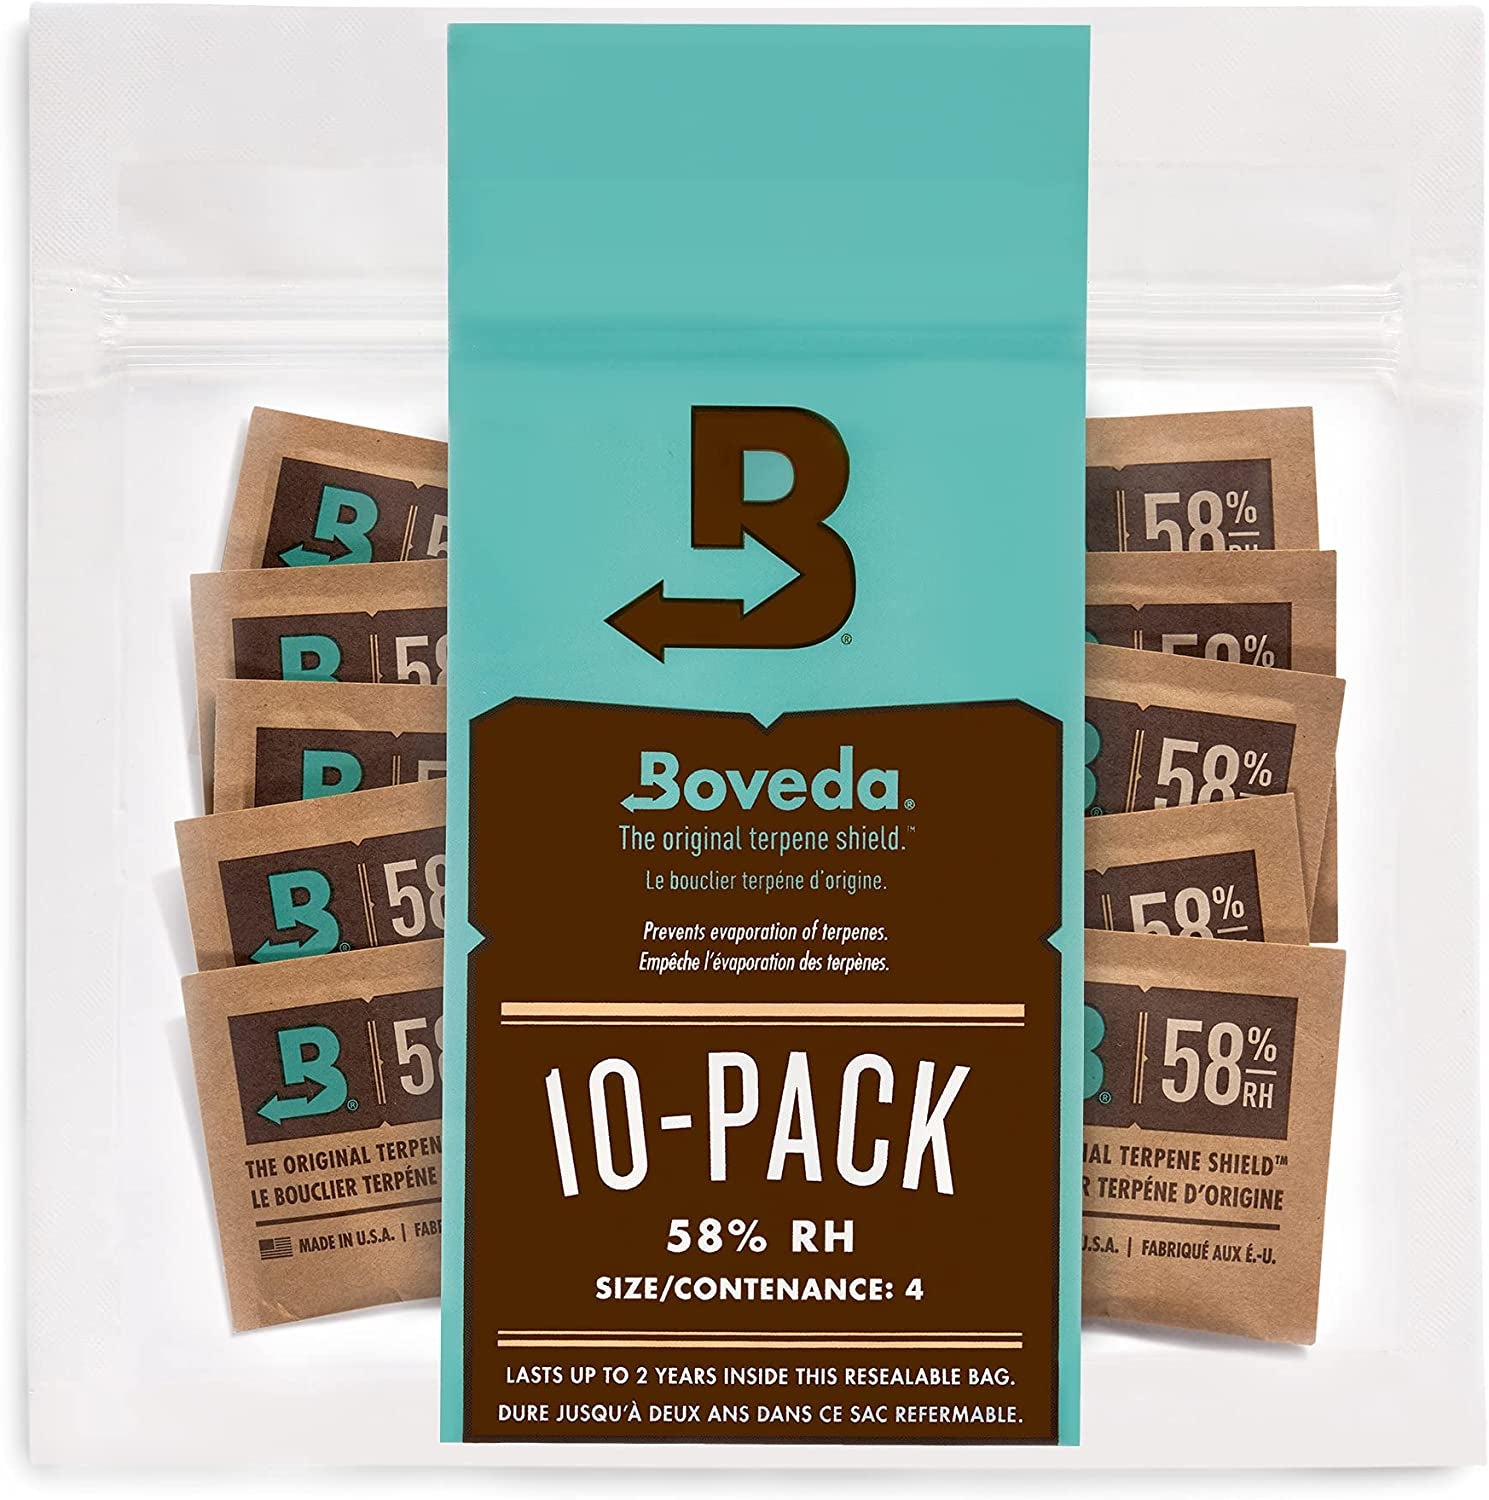 62% Two-Way Humidity Control Packs for Storing ½ Oz – Size 4 – 10 Pack – Moisture Absorbers for Small Storage Containers – Humidifier Packs – Hydration Packets in Resealable Bag